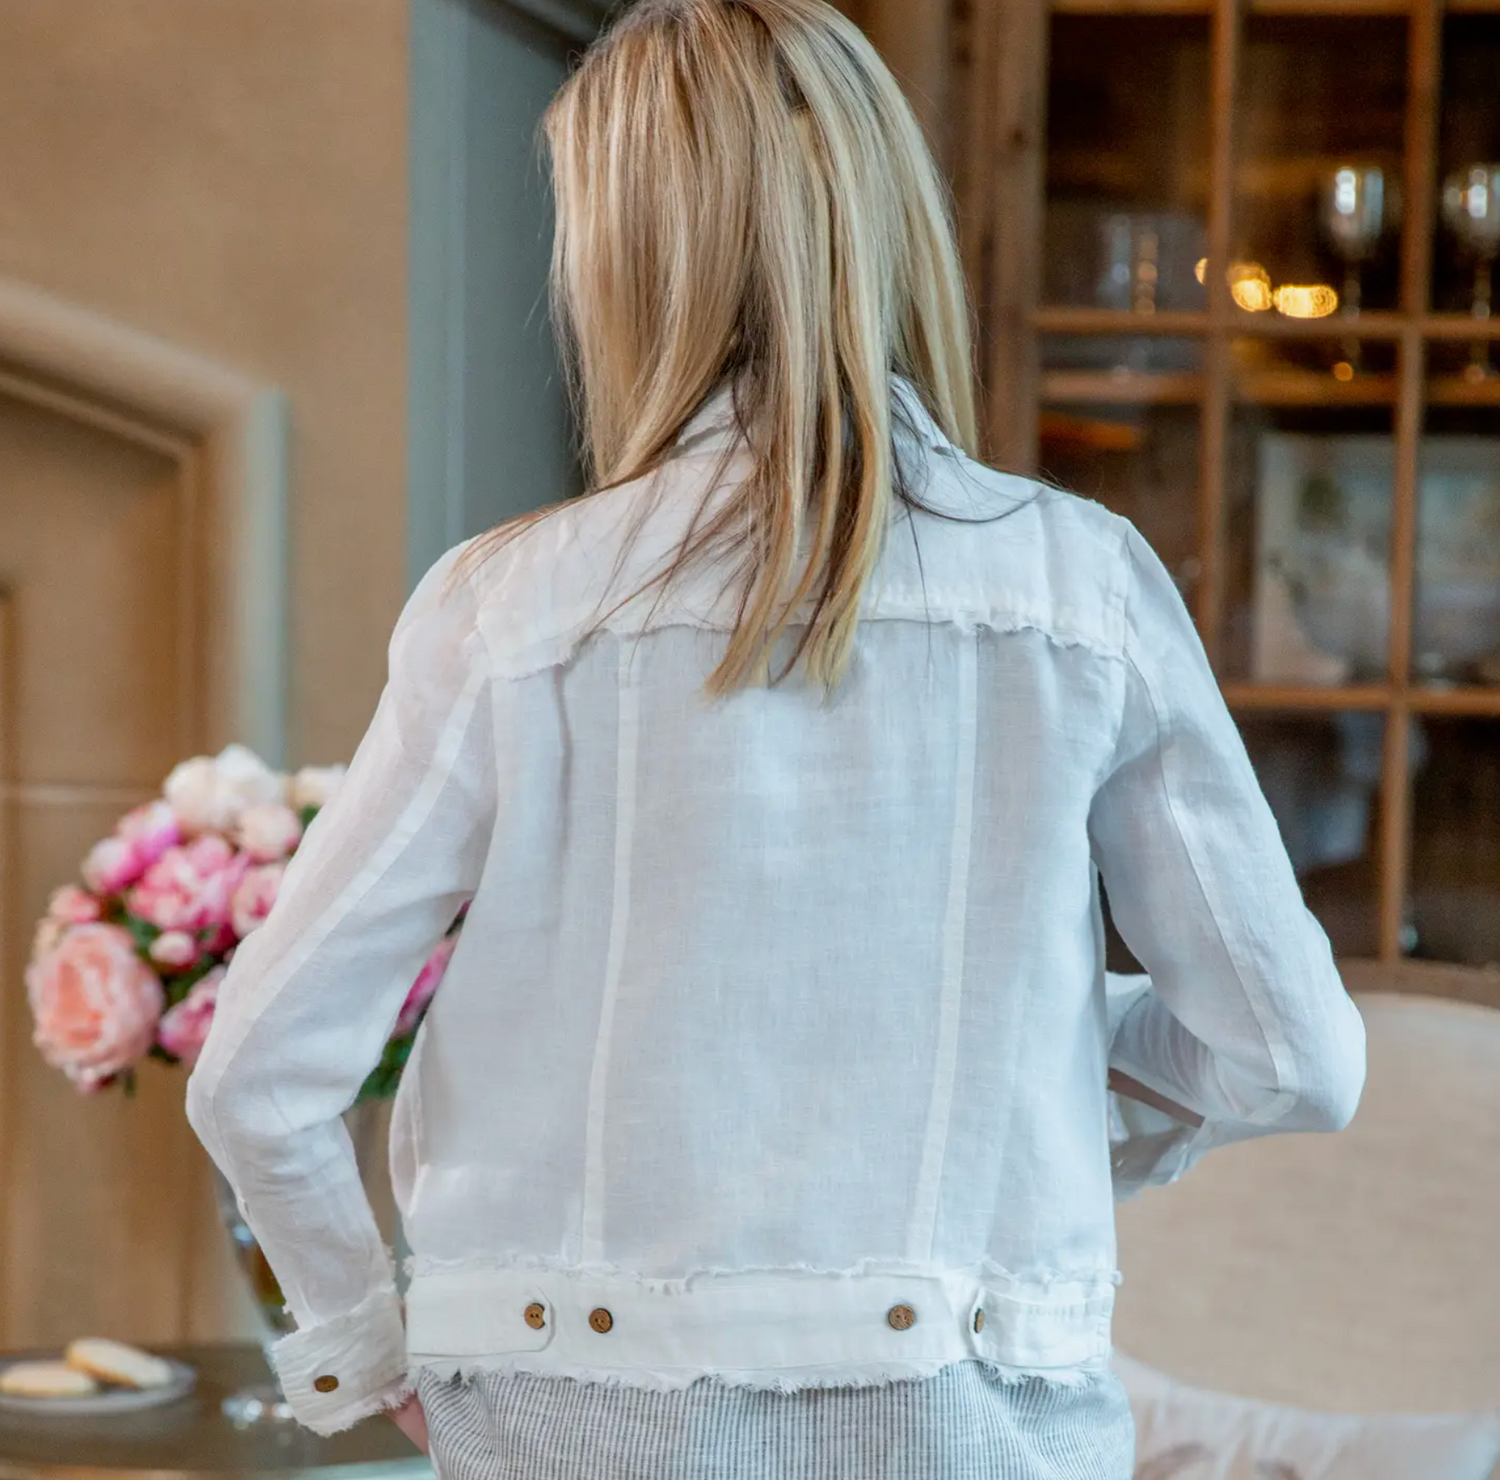 This flattering popular jacket is the perfect light weight jacket that goes with everything. It's the linen version of a denim jacket. Perfect for travel. A casual and comfortable jacket with frayed edges. Made in Ukraine. 